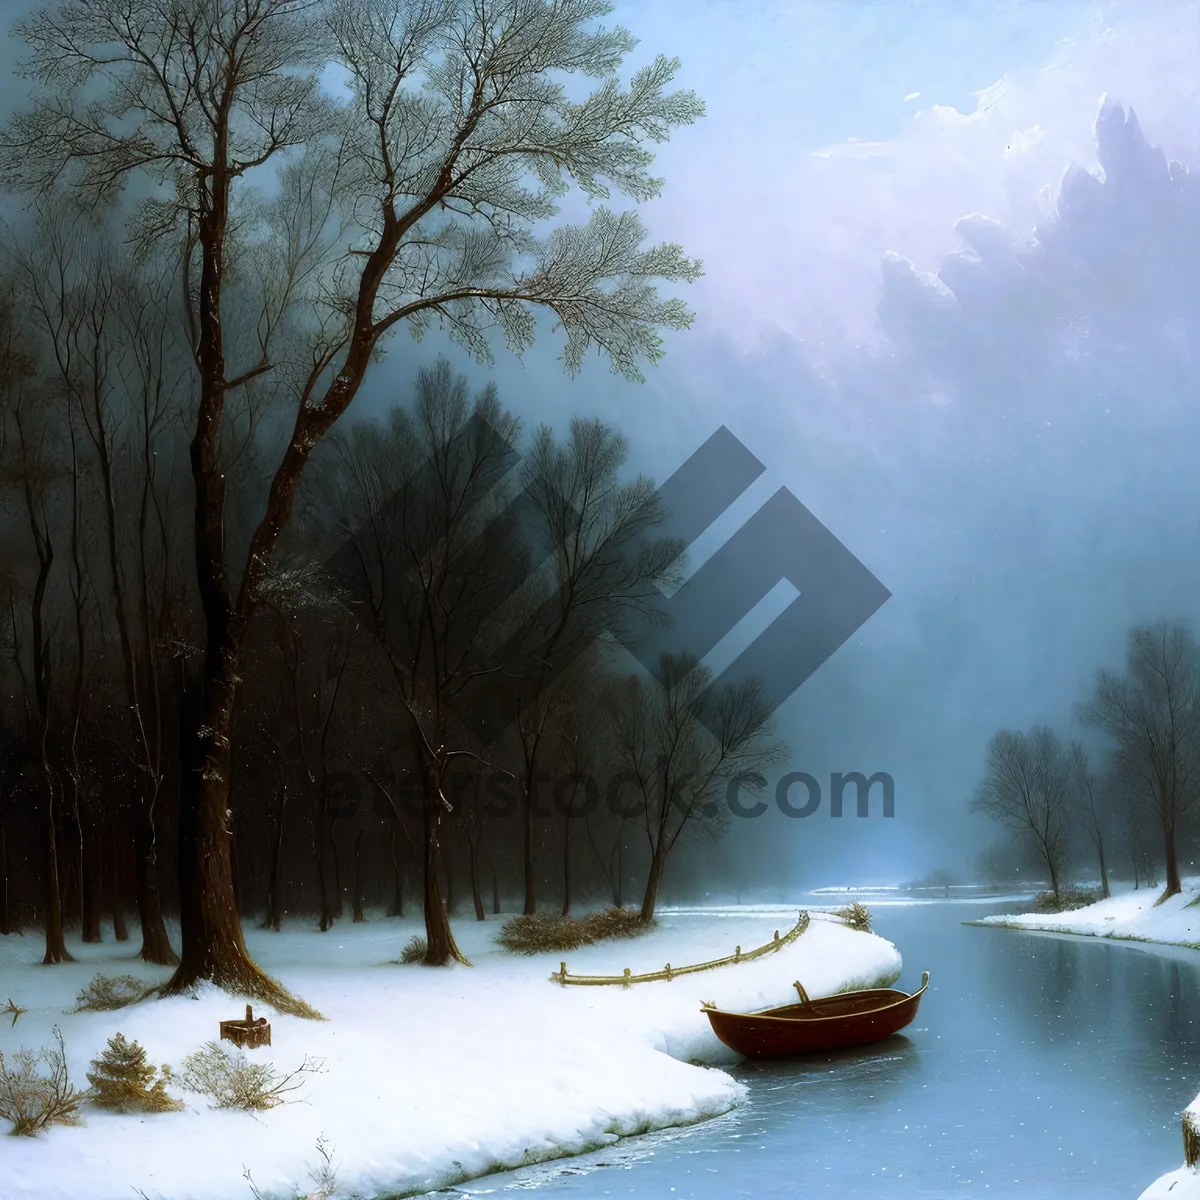 Picture of Frosty Winter Landscape with Snowplow Clearing Road